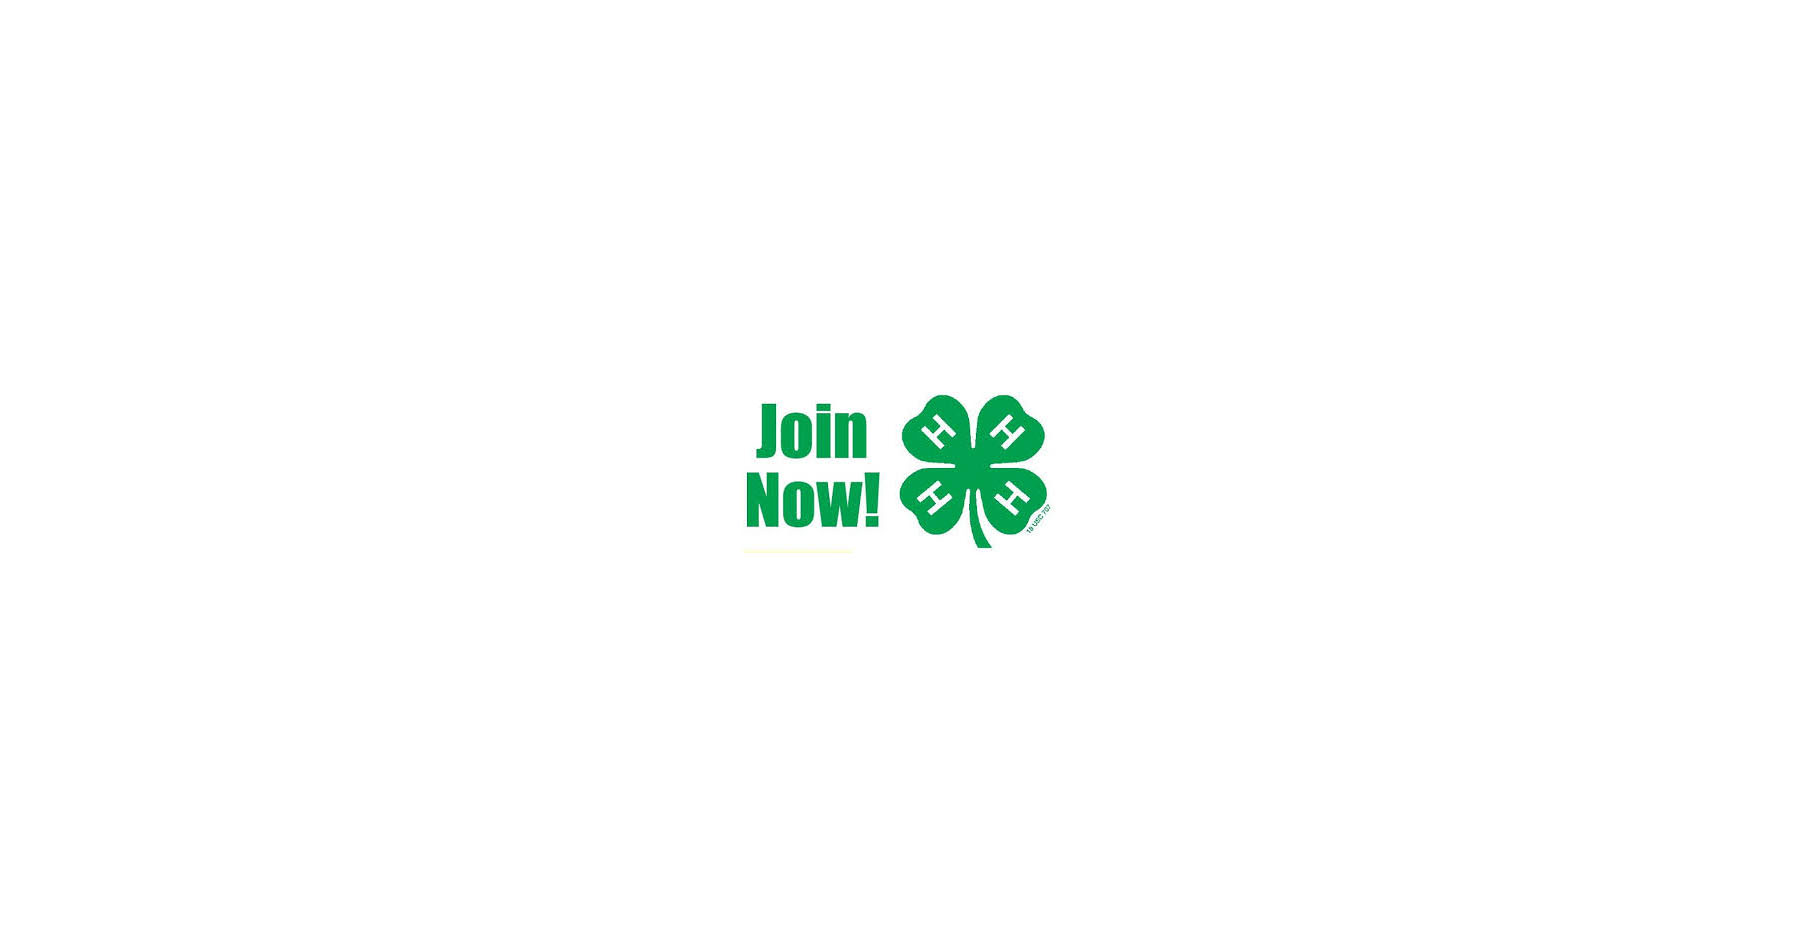 Join 4-H!